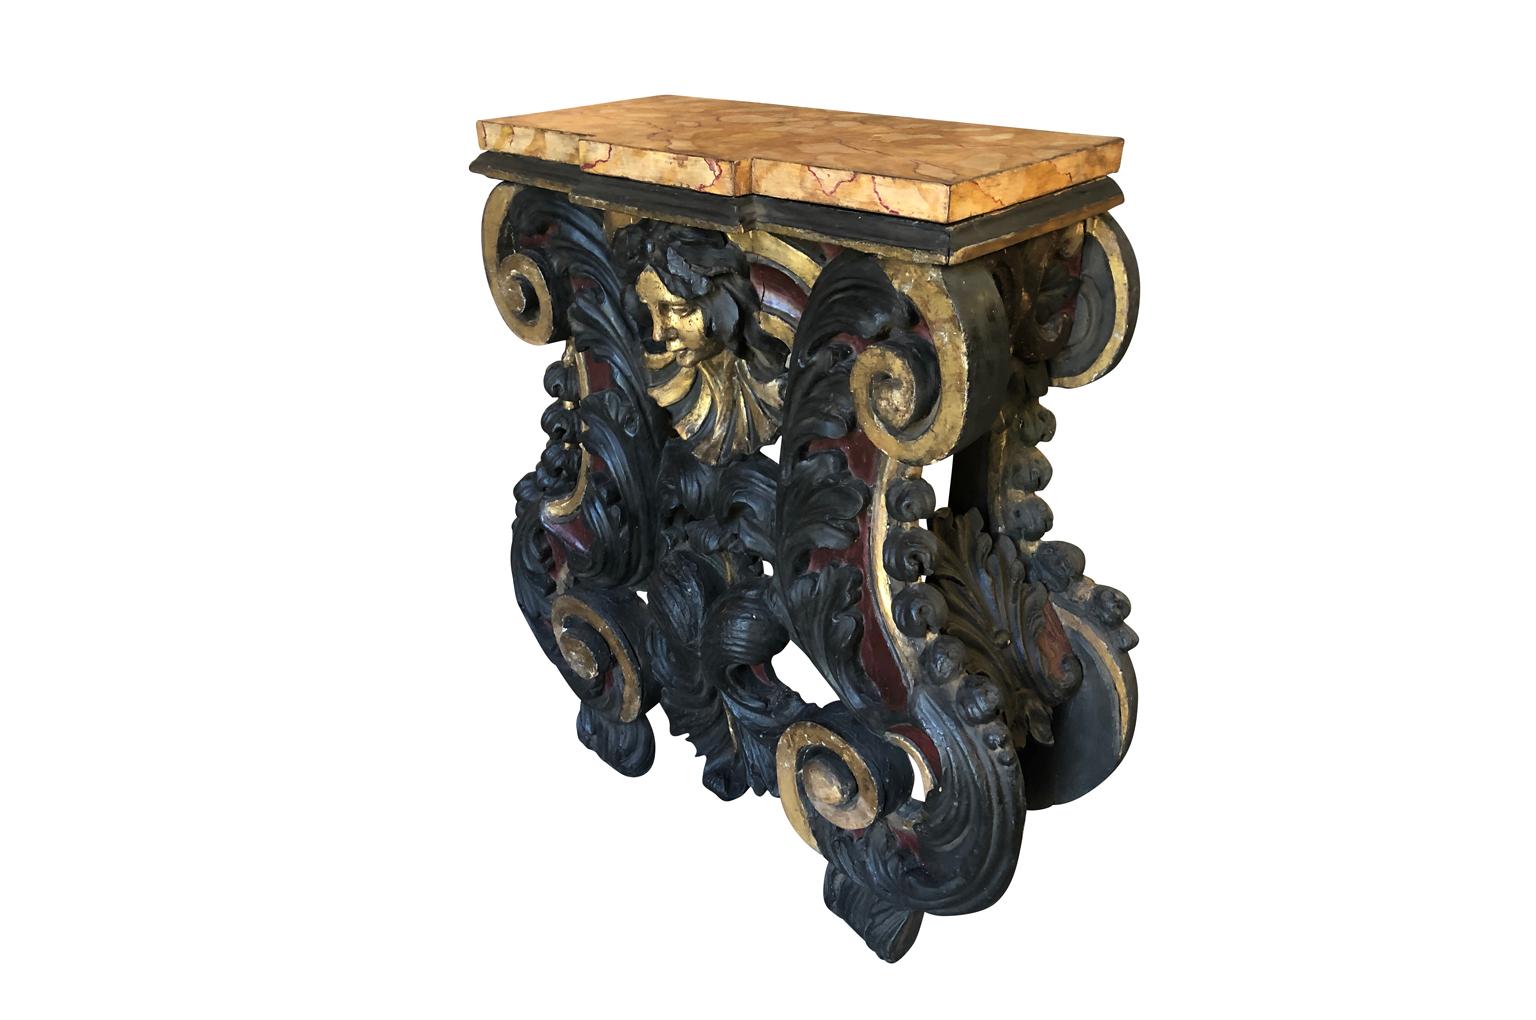 A spectacular and outstanding 17th century Venetian Console. Superbly crafted from hand carved wood with a polychromed and gilt finish. The removable top has a stunning Faux Marble finish. The original purpose of such a console was to have a statue